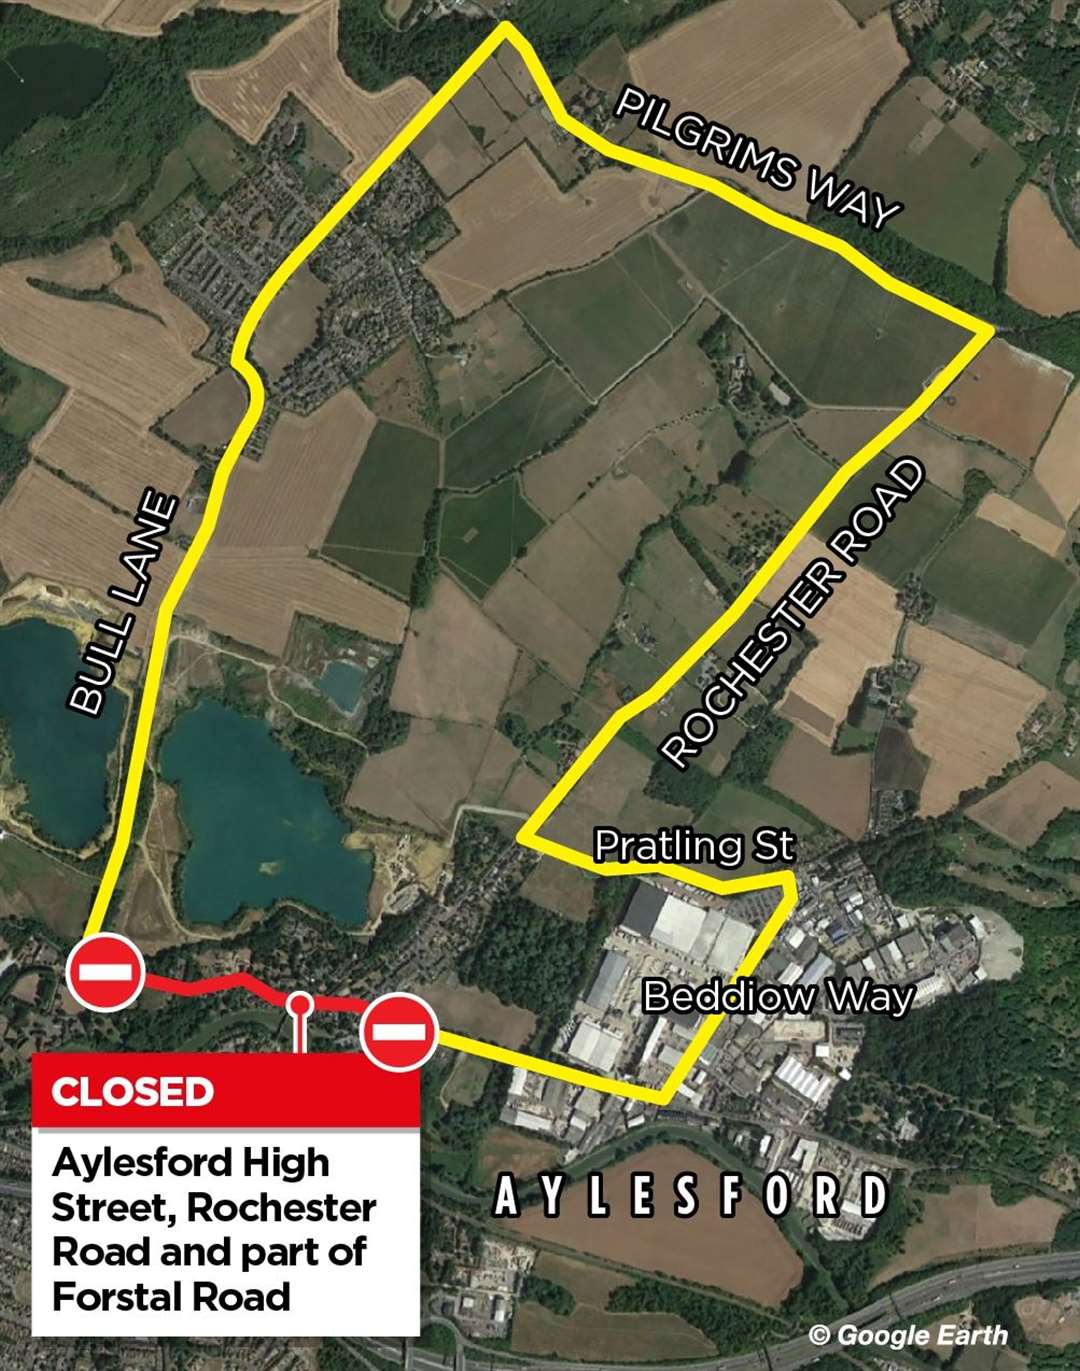 Drivers will have to use this diversion route